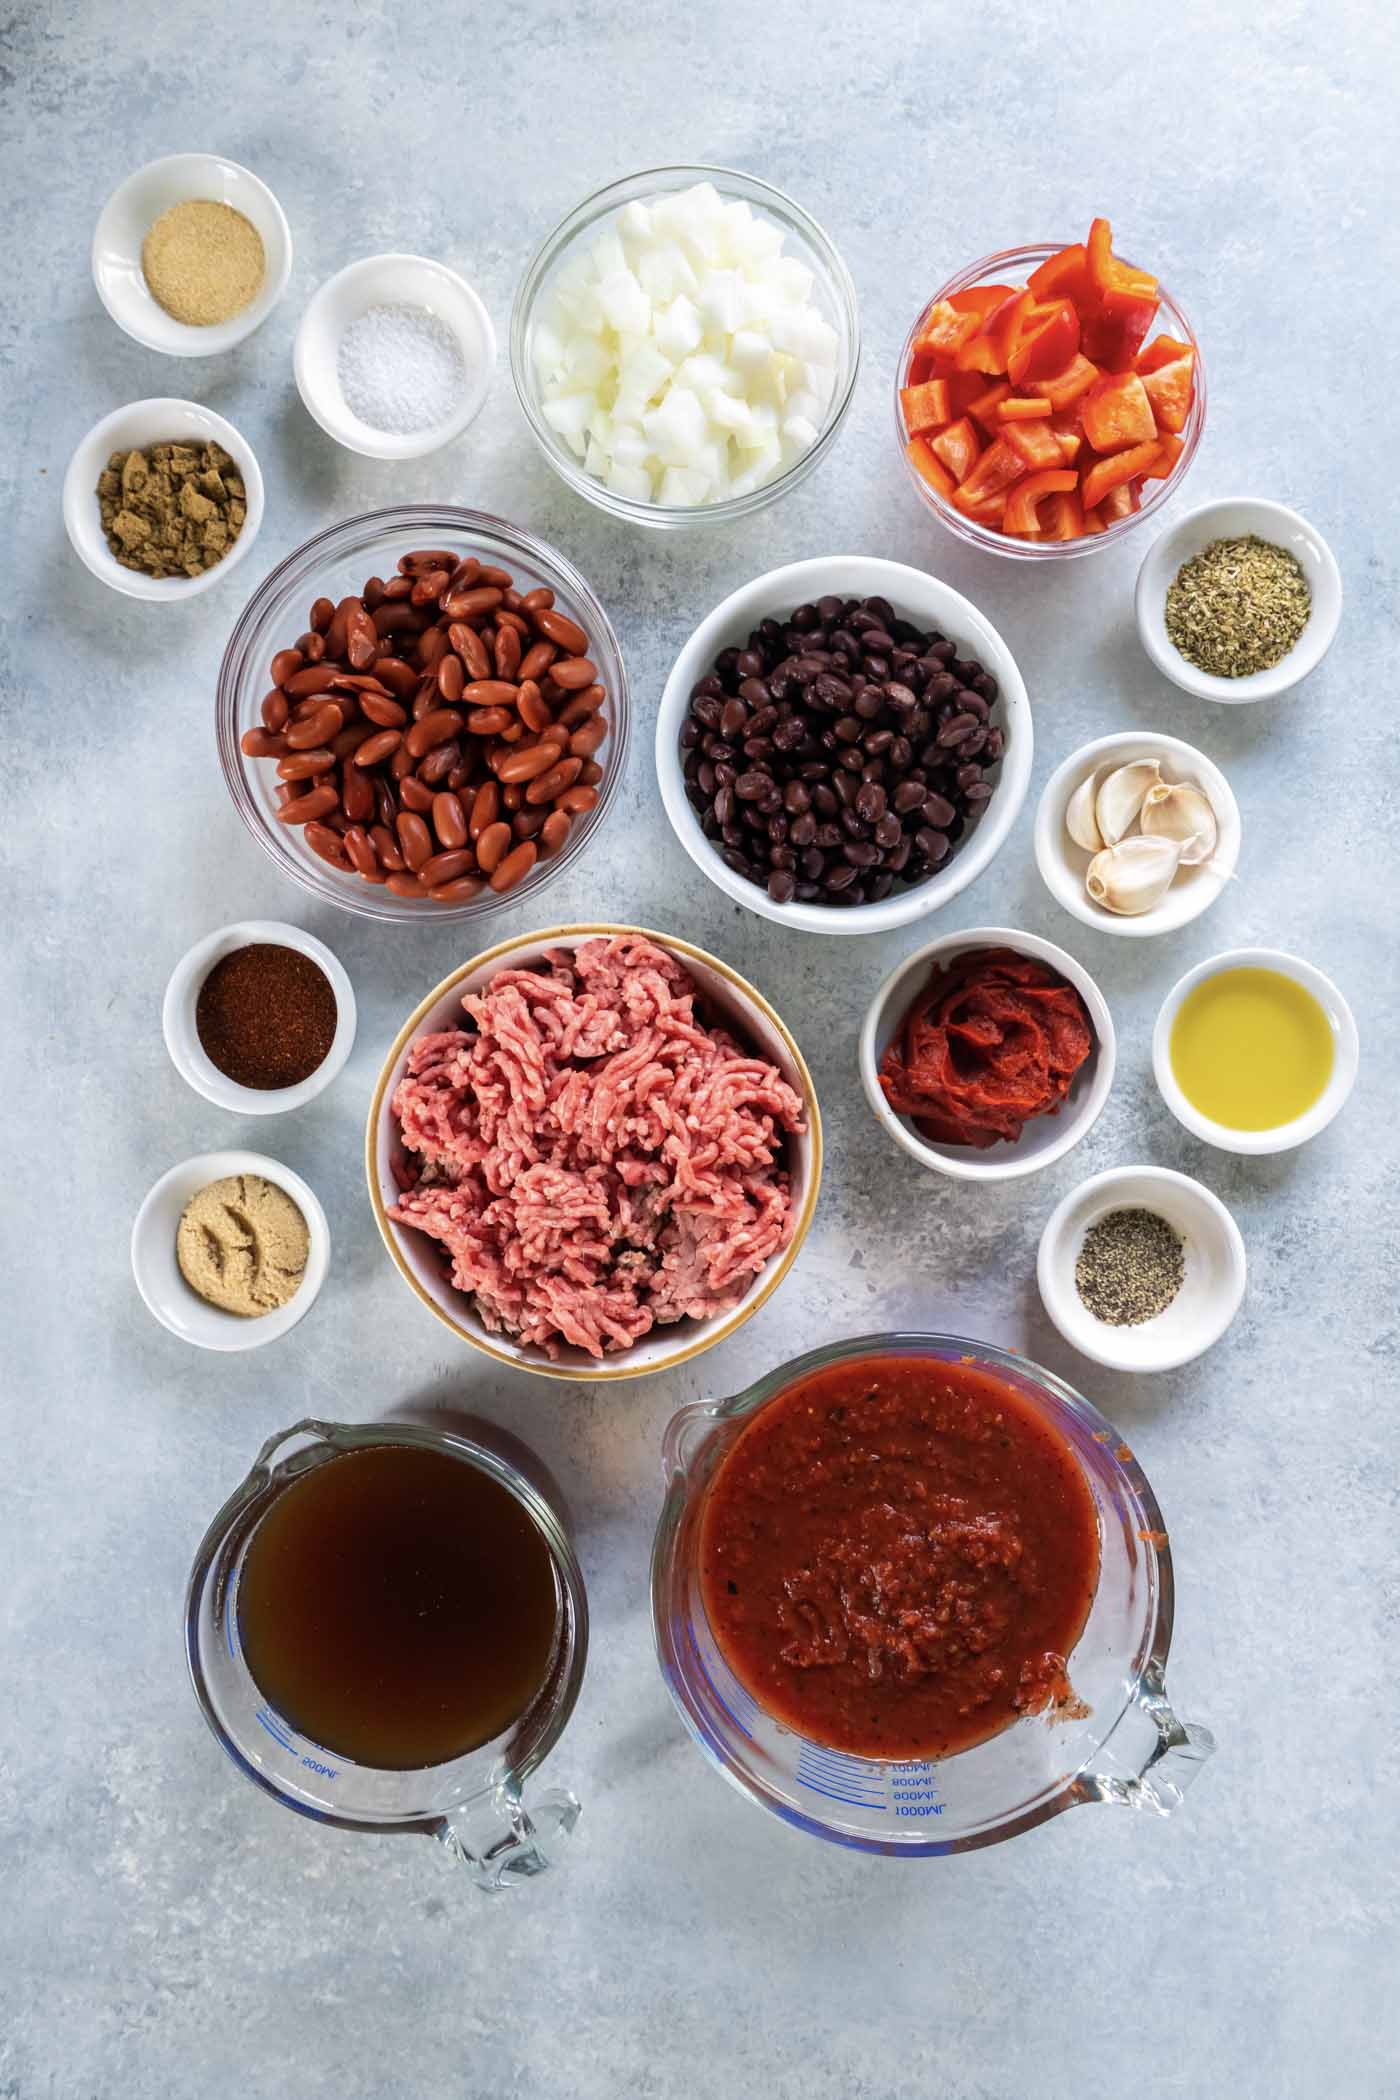 Ingredients for instant pot chili recipe.